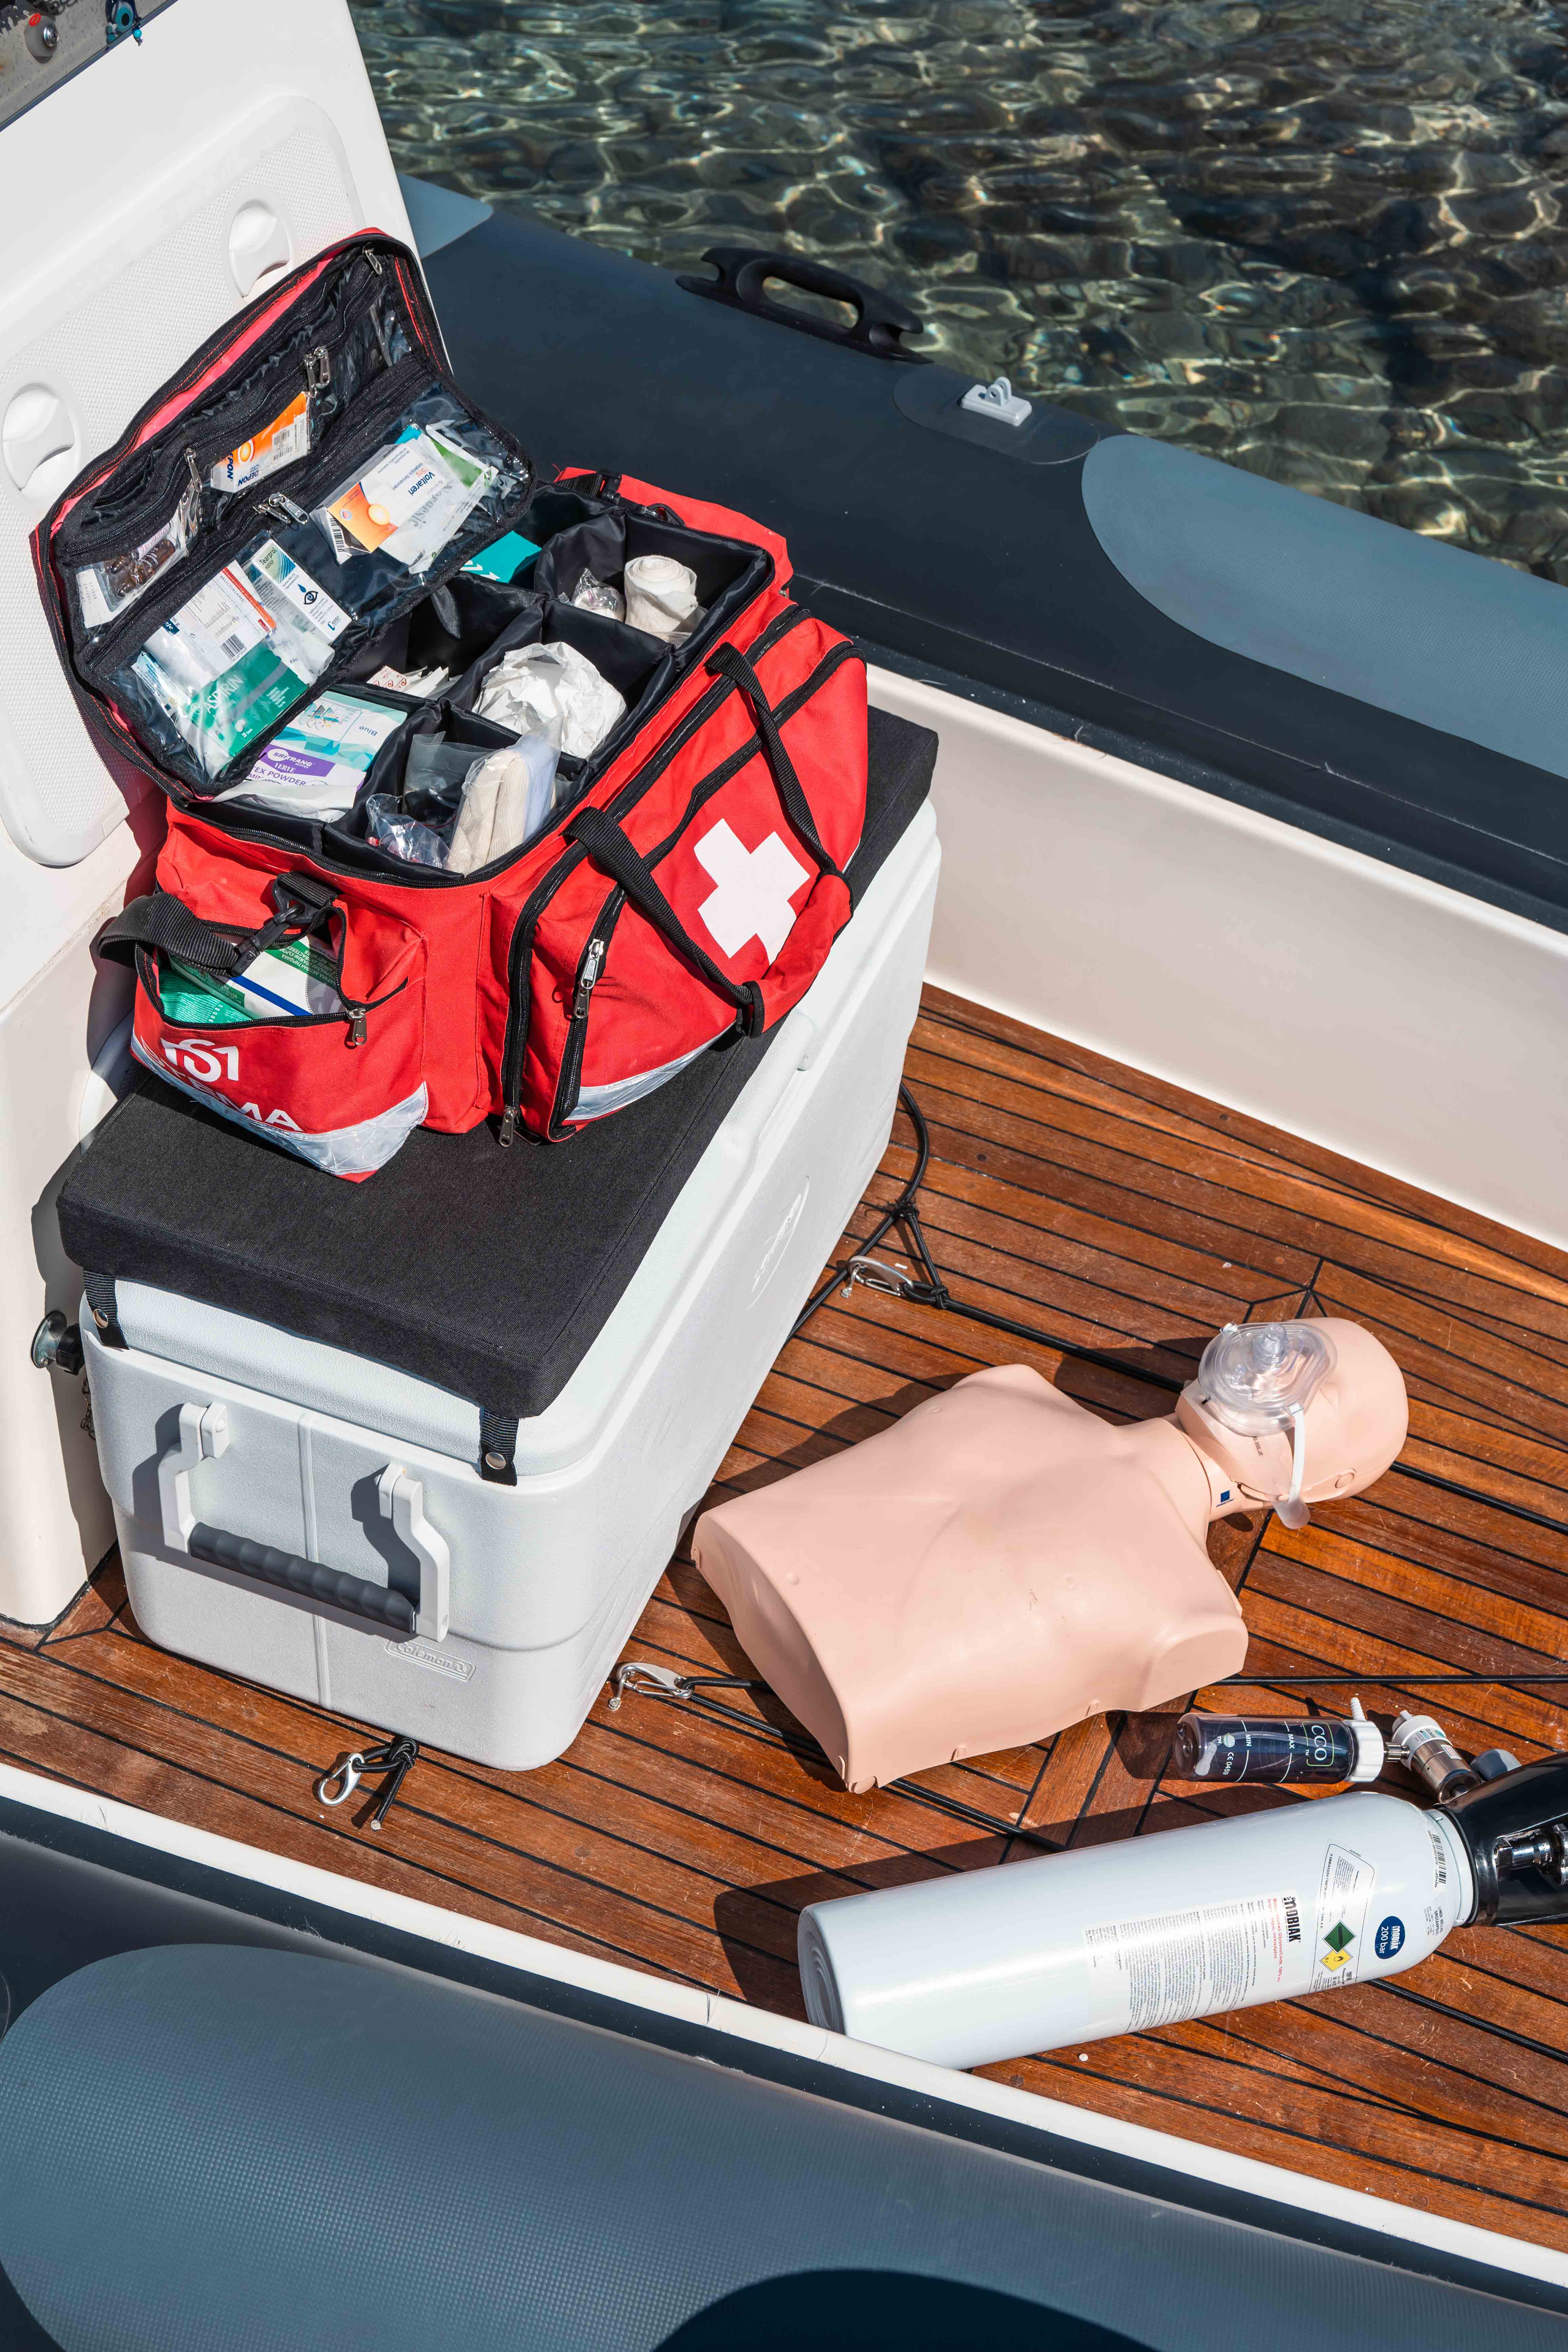 Medical Kit with Oxygen supply & AED onboard our diving boat.